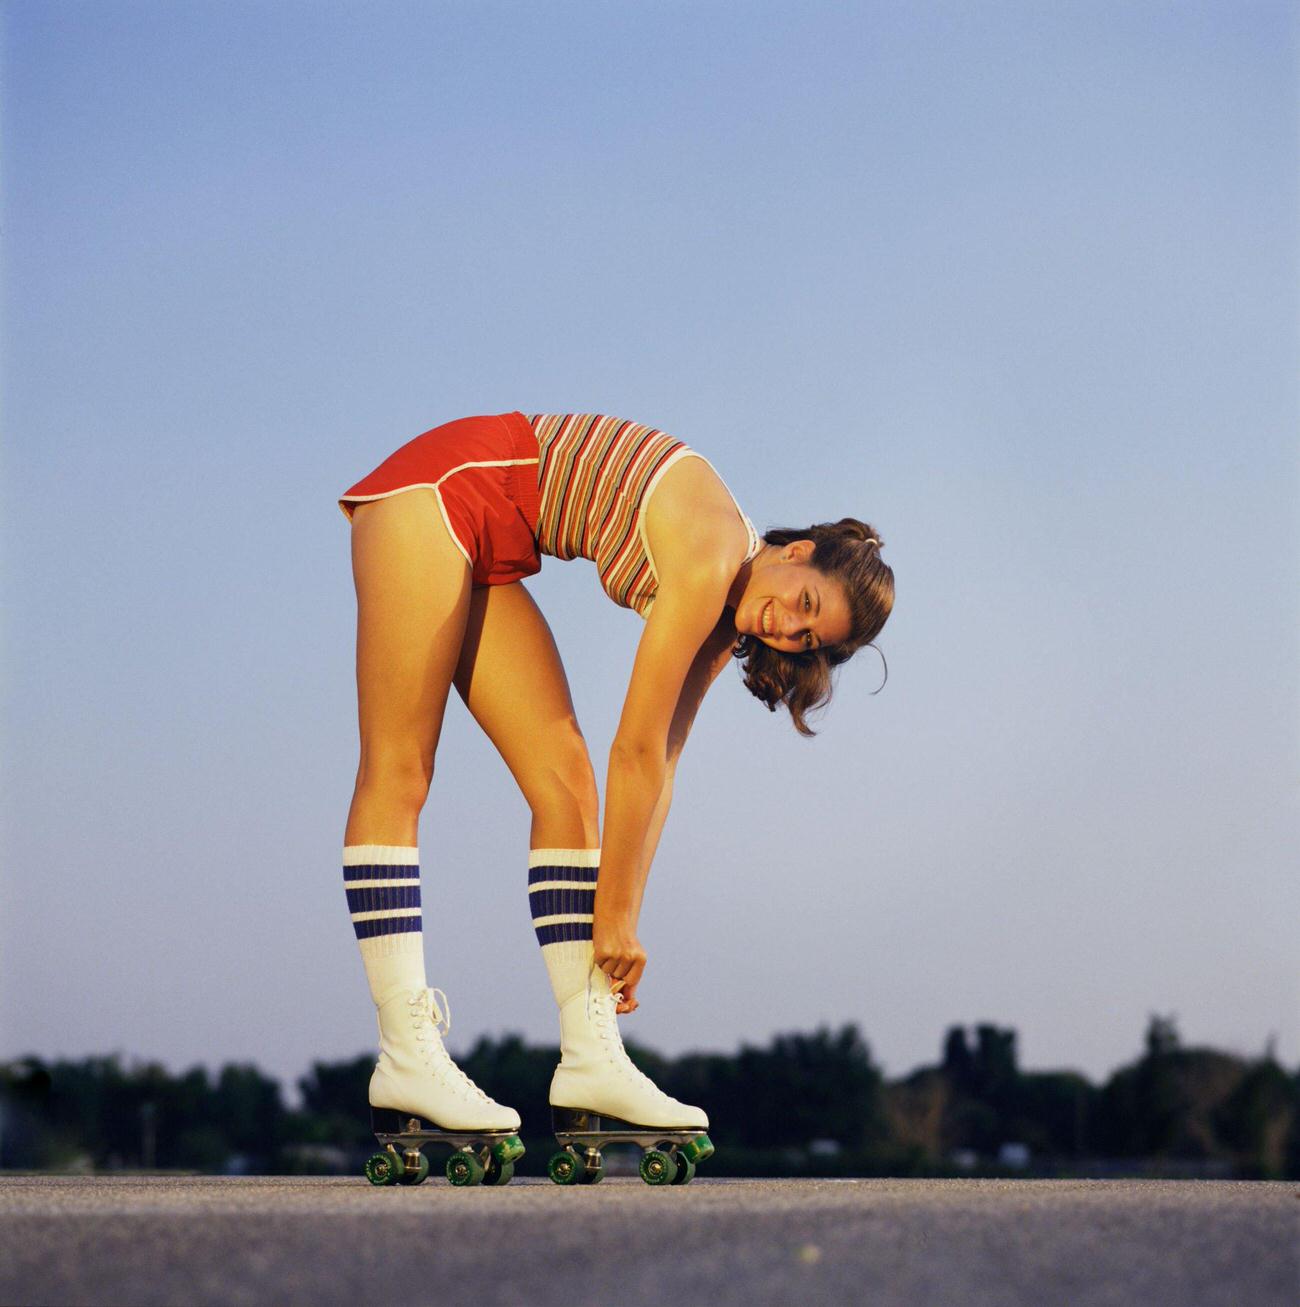 Woman Tying Laces of Her Roller Skates